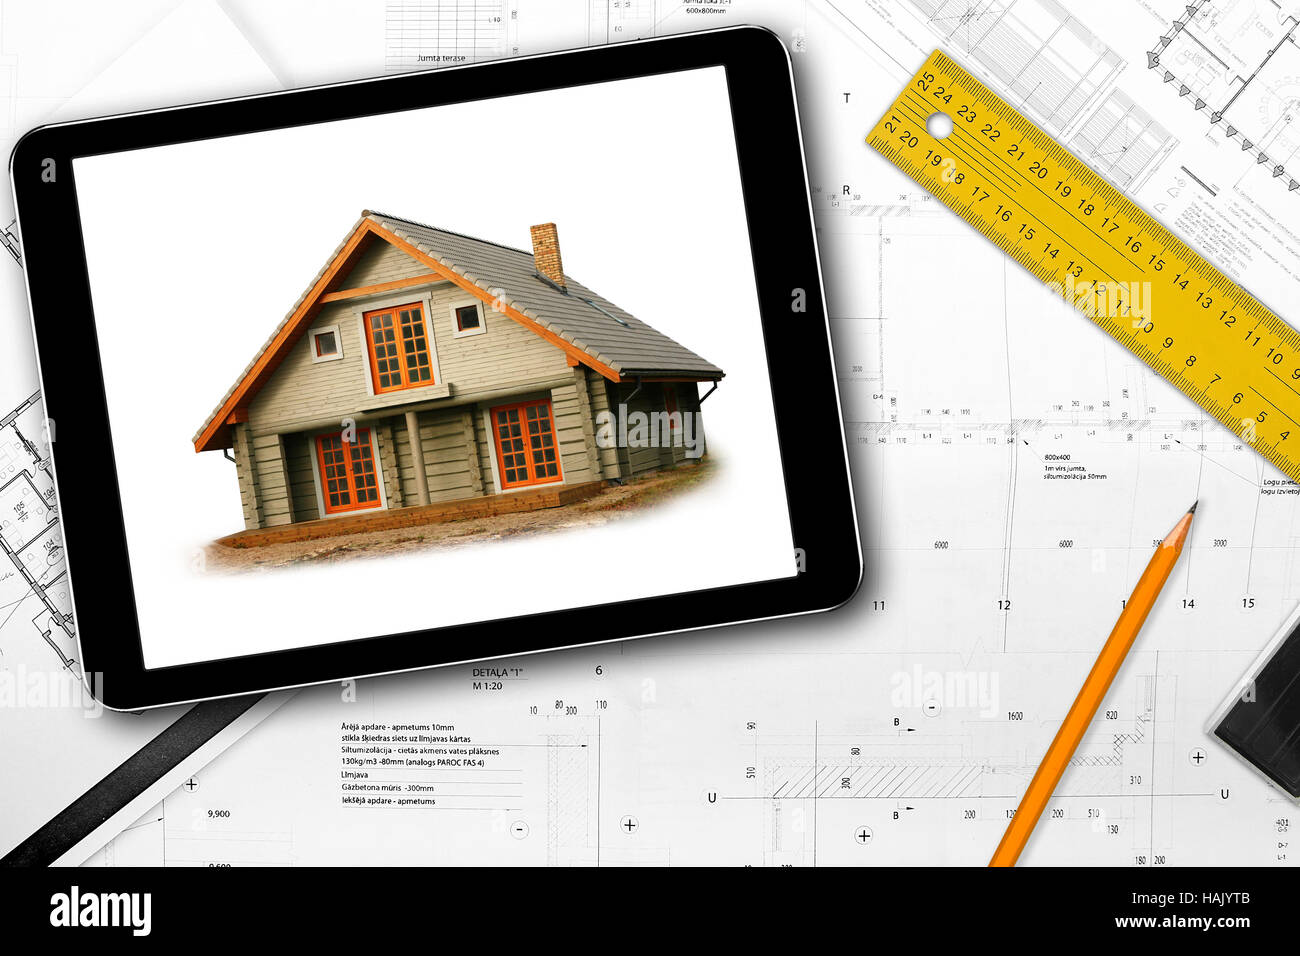 digital tablet, tools and architect draft on the table Stock Photo